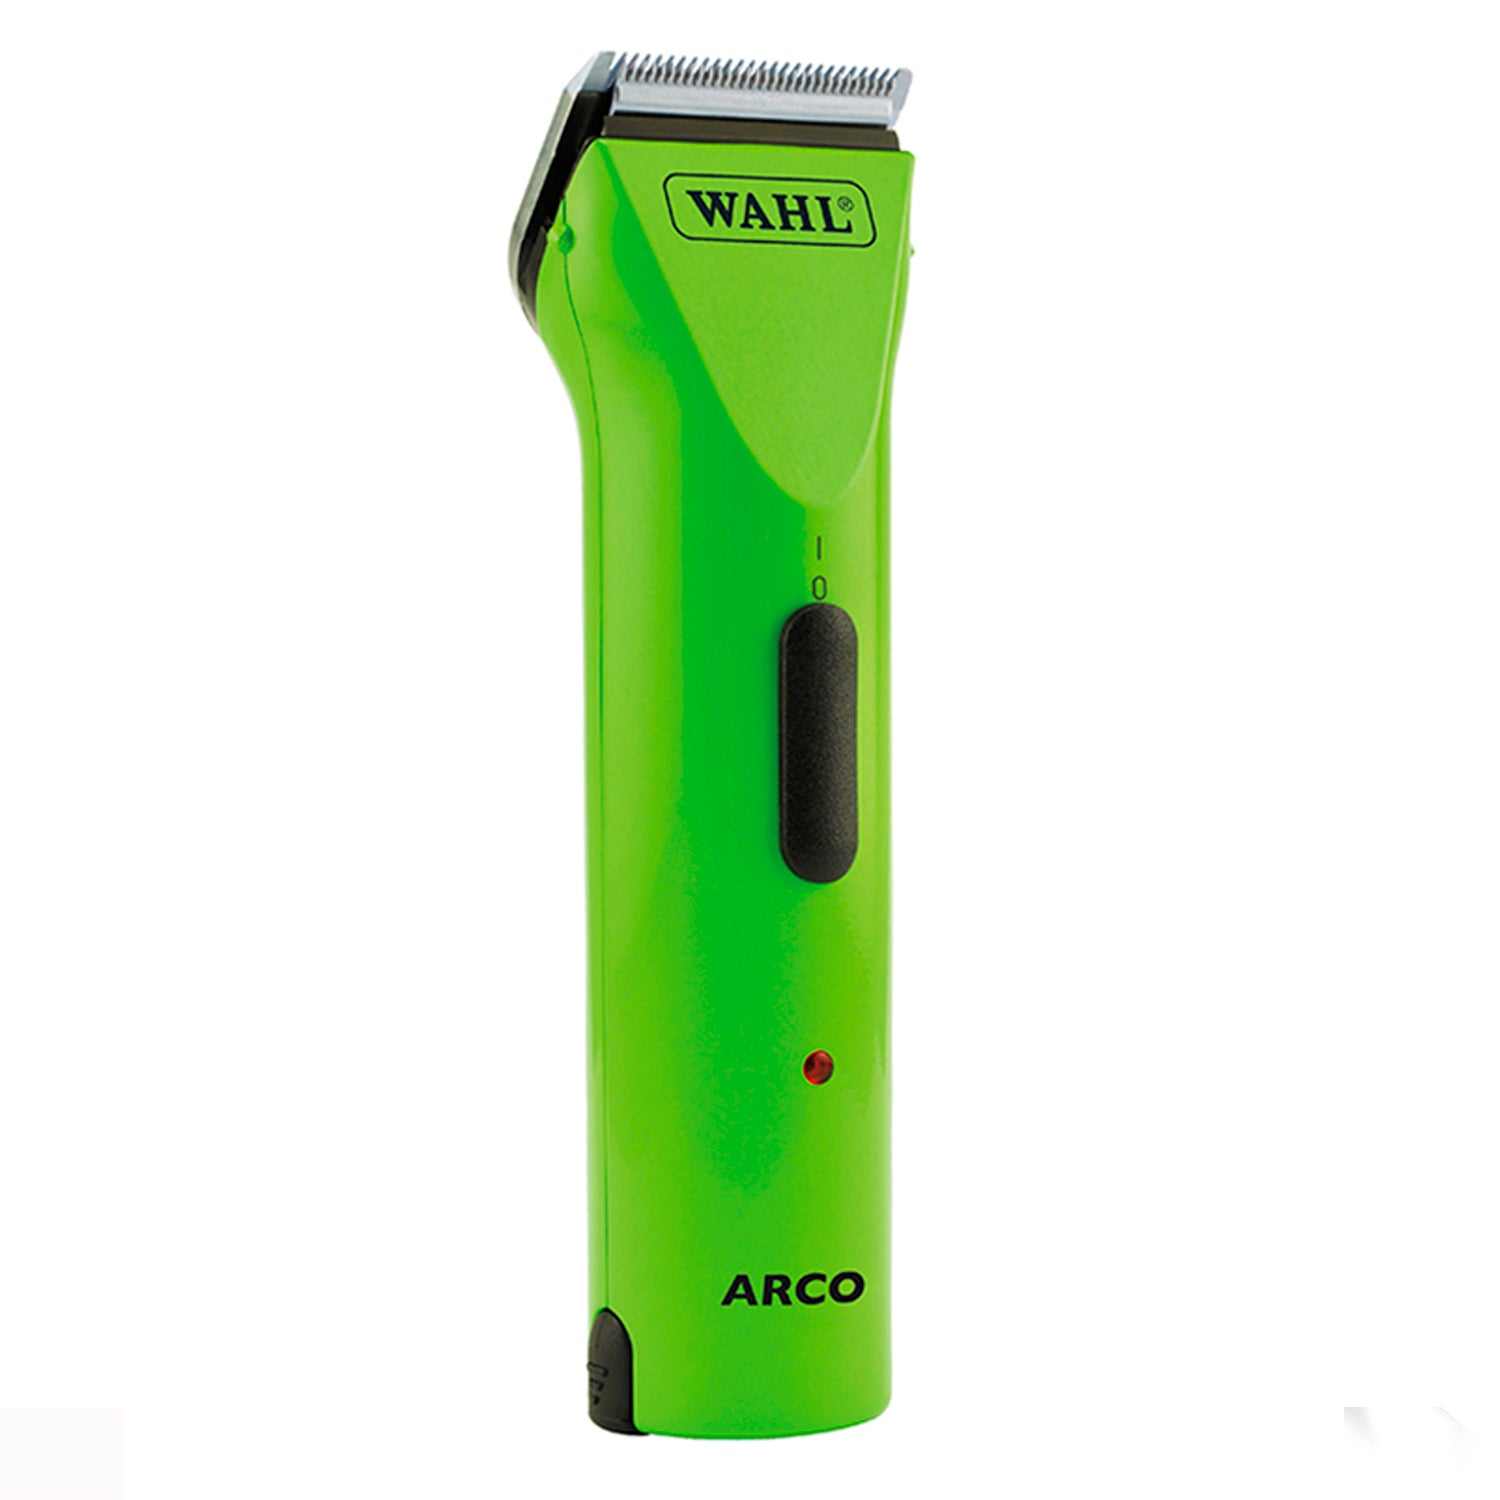 wahl arco 5 in 1 blade